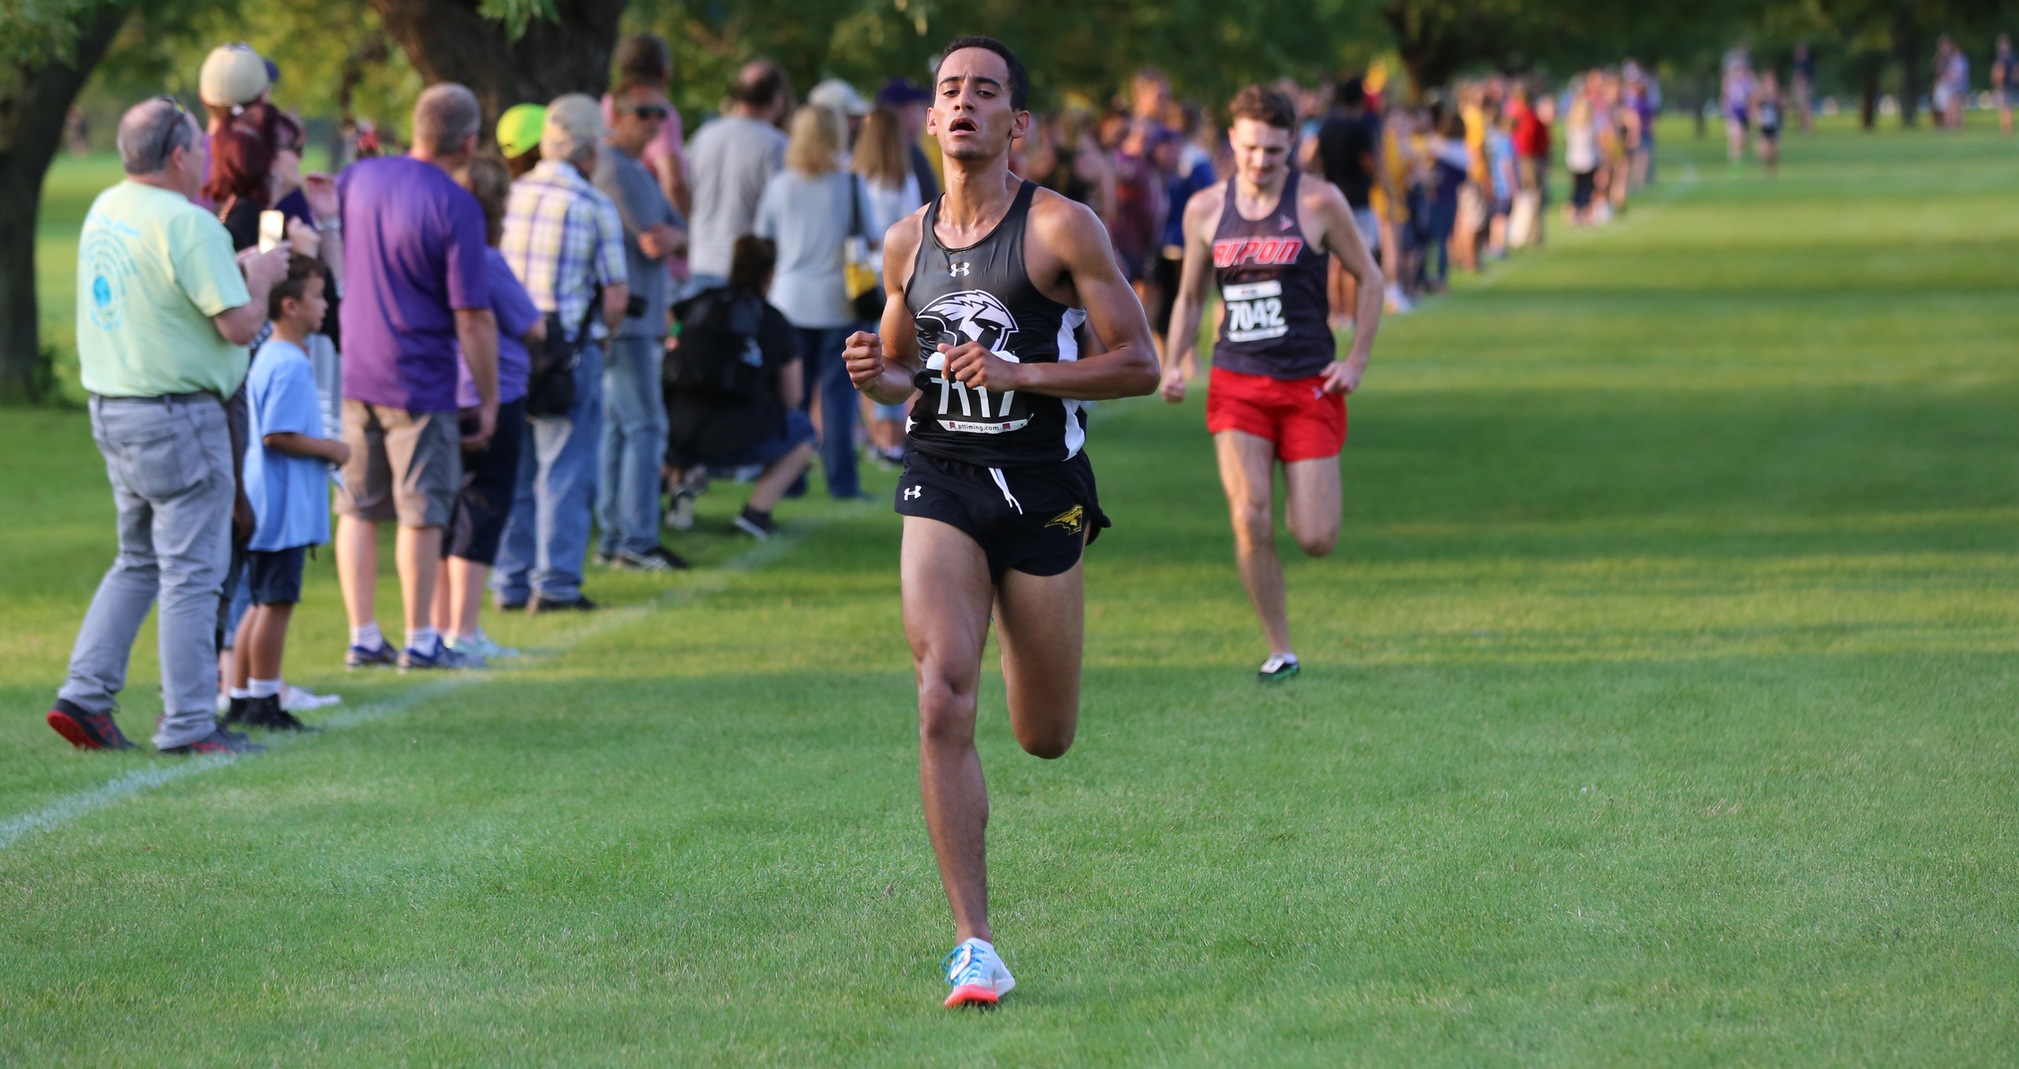 Steven Potter crossed the finish line at the Blugold Invitational in 16th place.